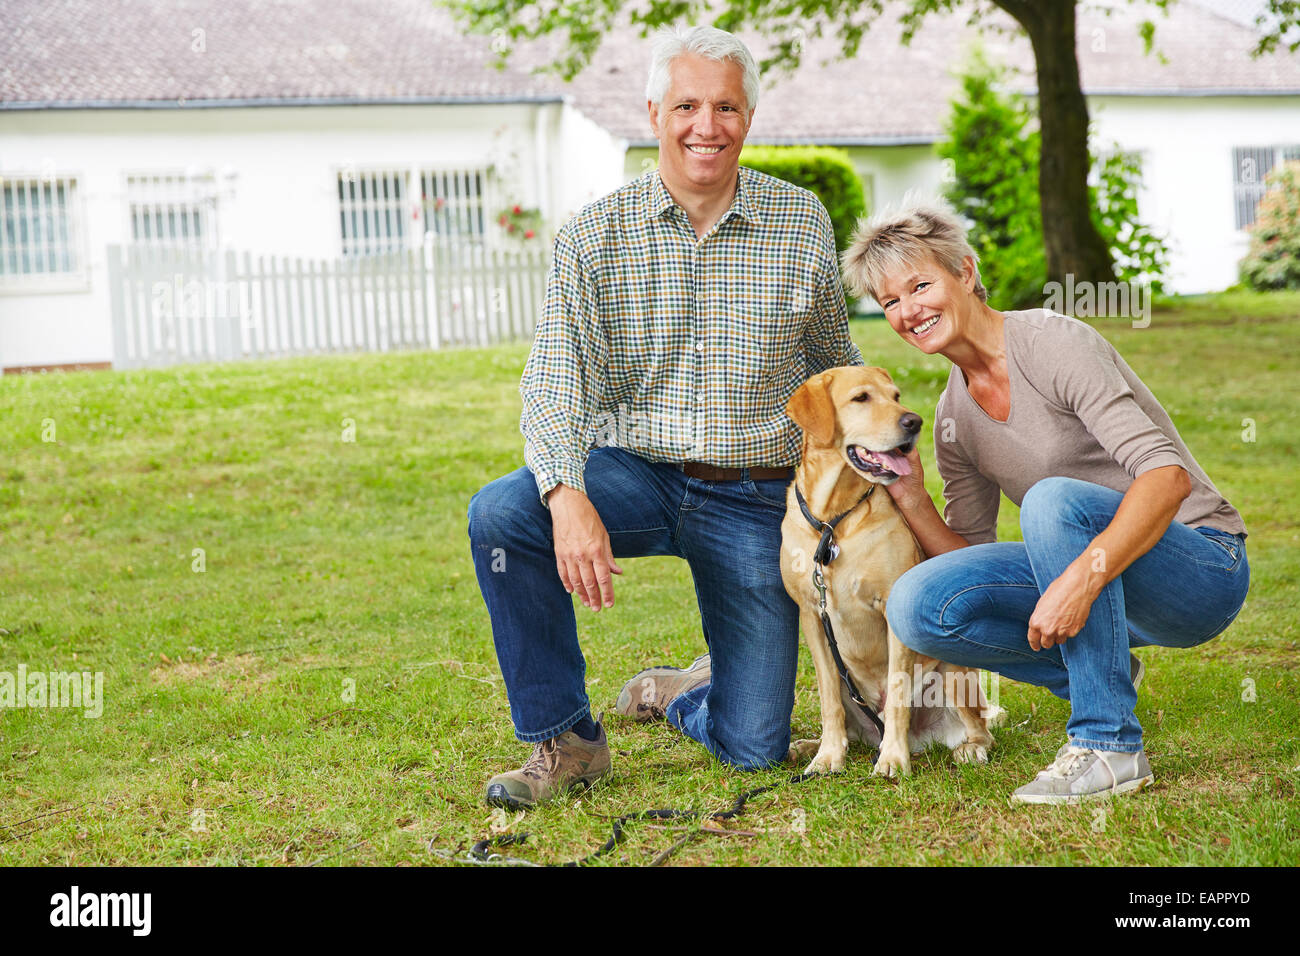 Two smiling senior people sitting with dog in front of their house in the garden Stock Photo